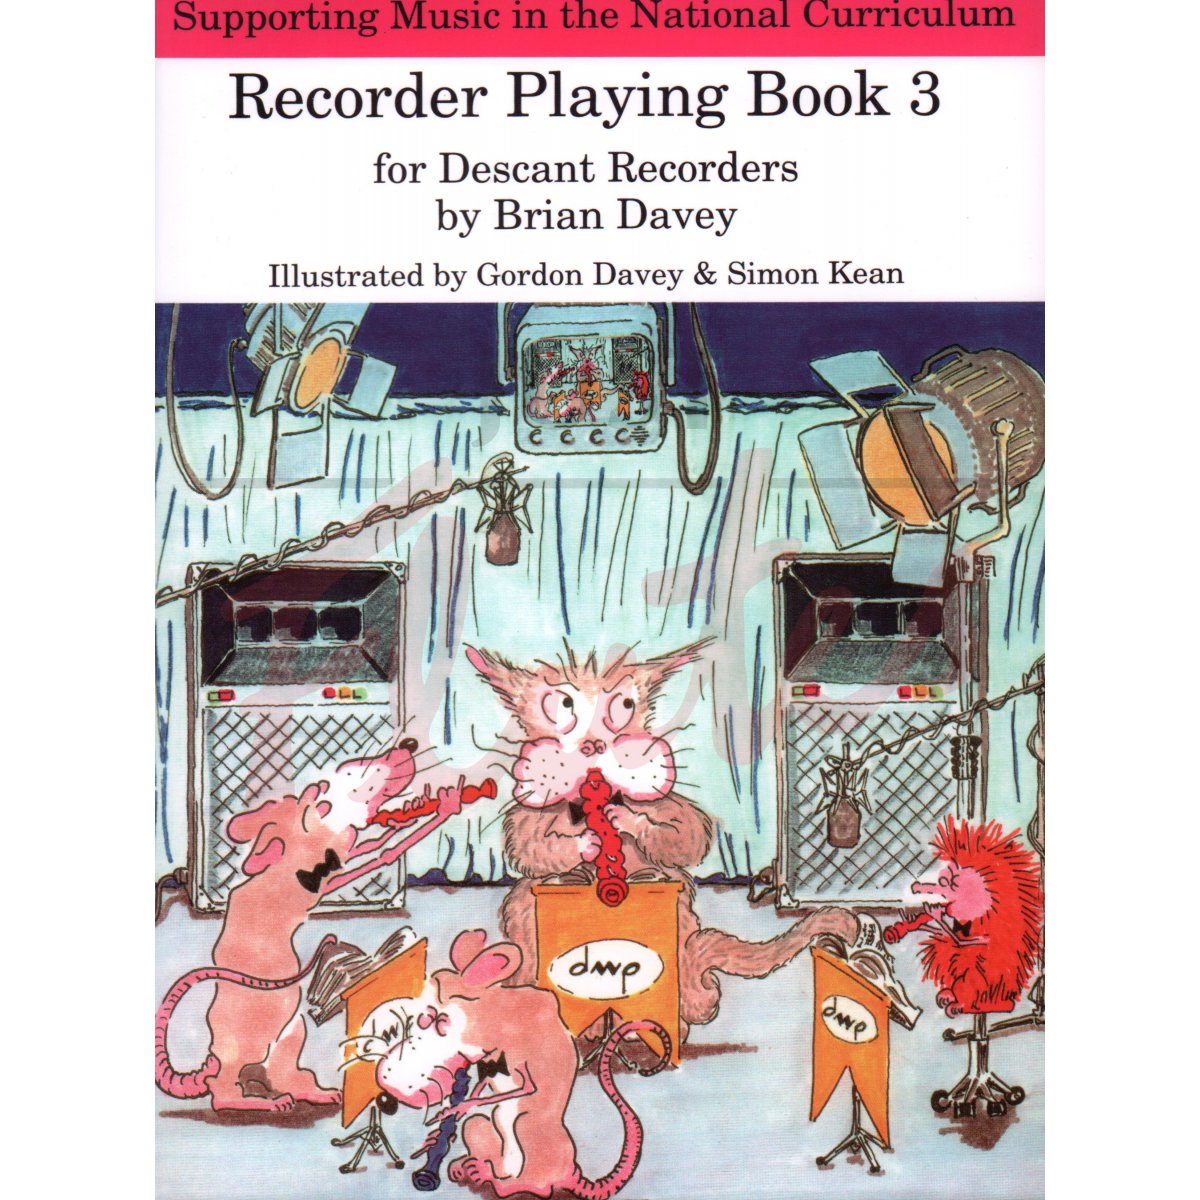 Recorder Playing Book 3 for Descant Recorders